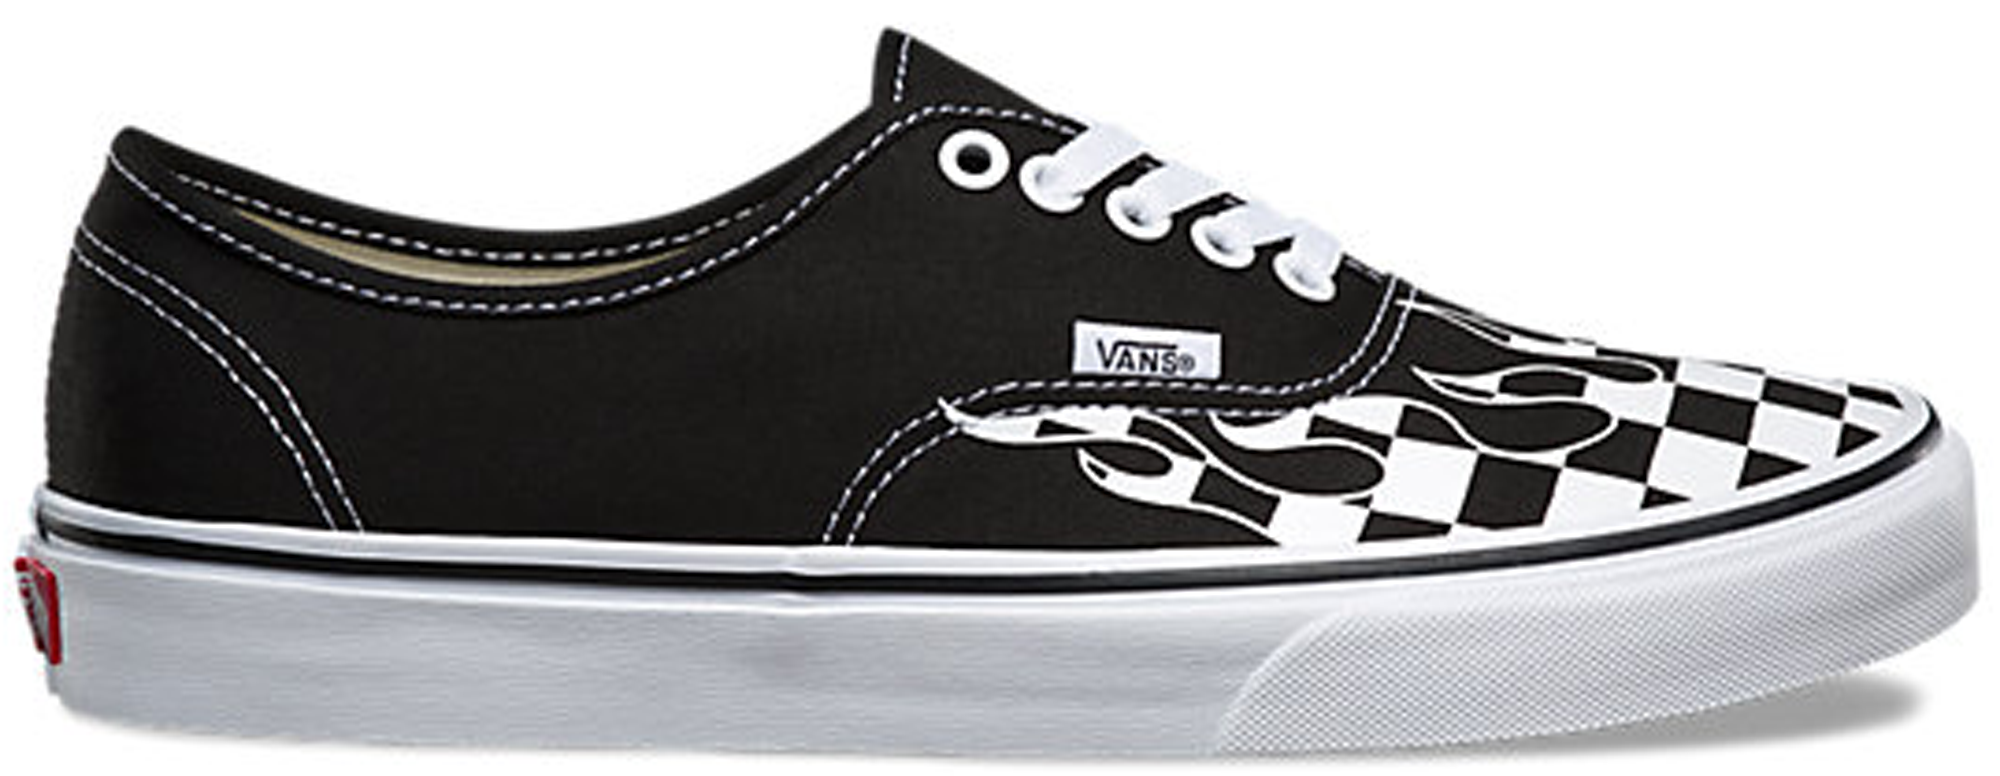 Vans Authentic Checkerboard Flame Black -